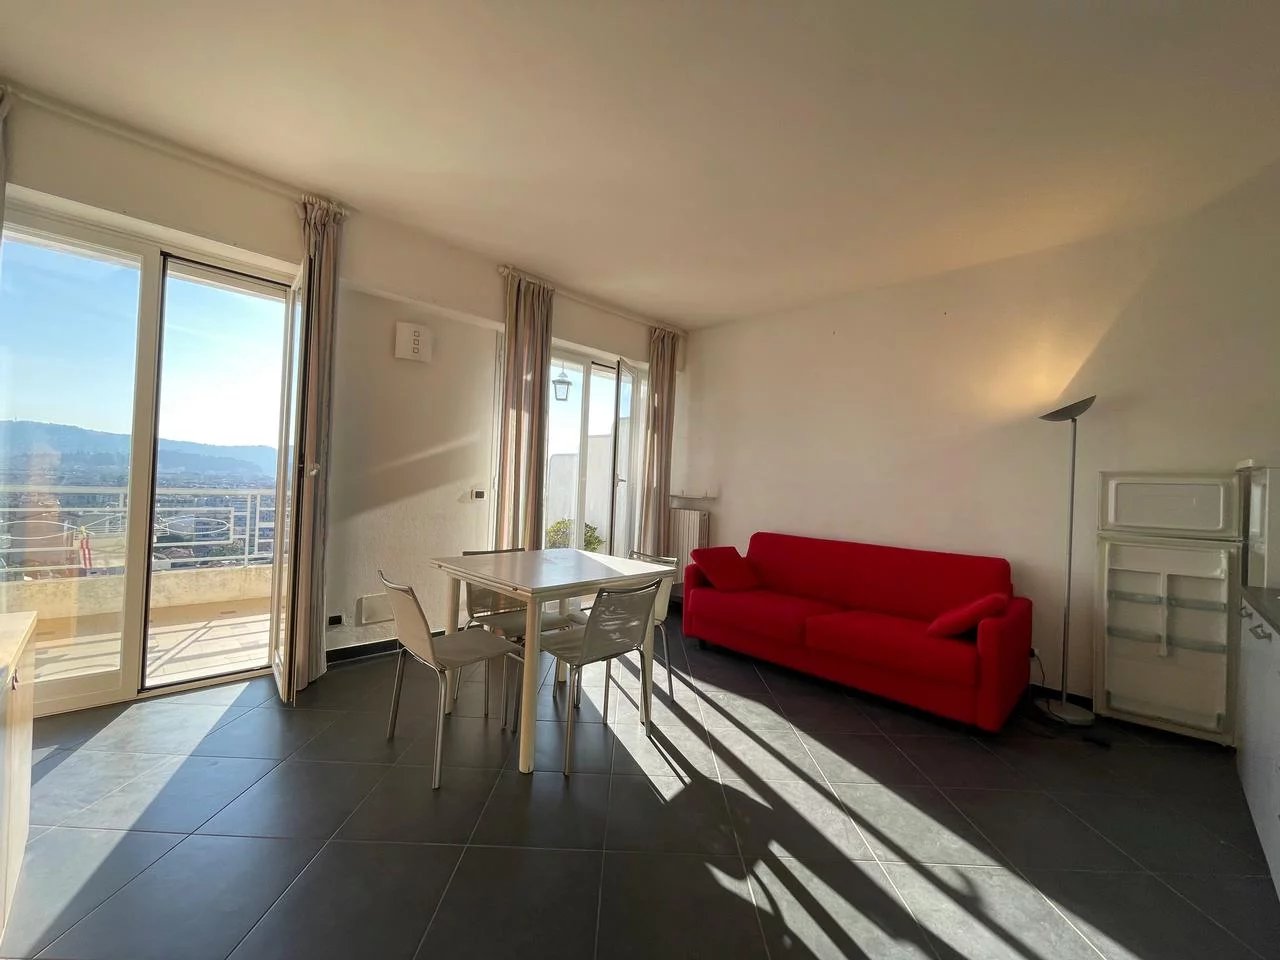 Appartement  2 Rooms 37m2  for sale   289 500 €